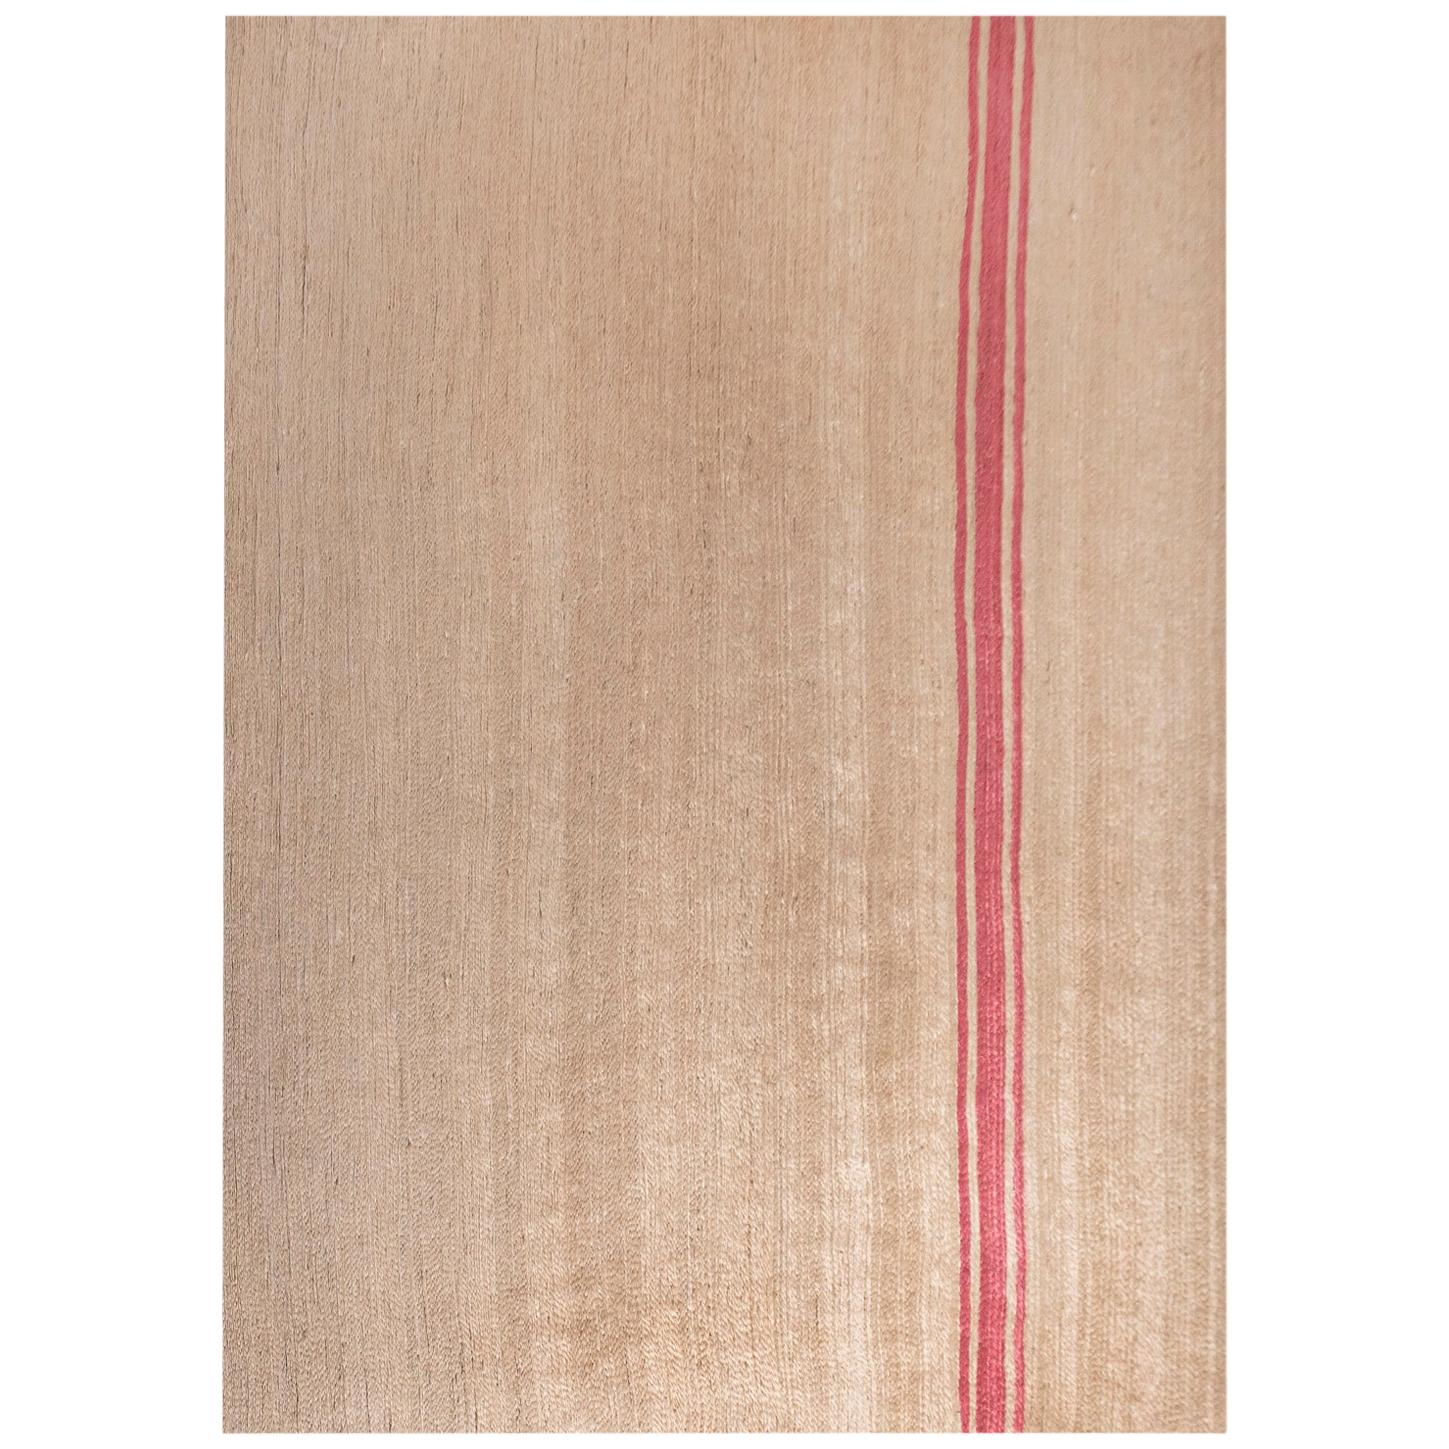 Modern Handwoven Jute Carpet Rug in Natural Brown with Pink Stripes Provenza